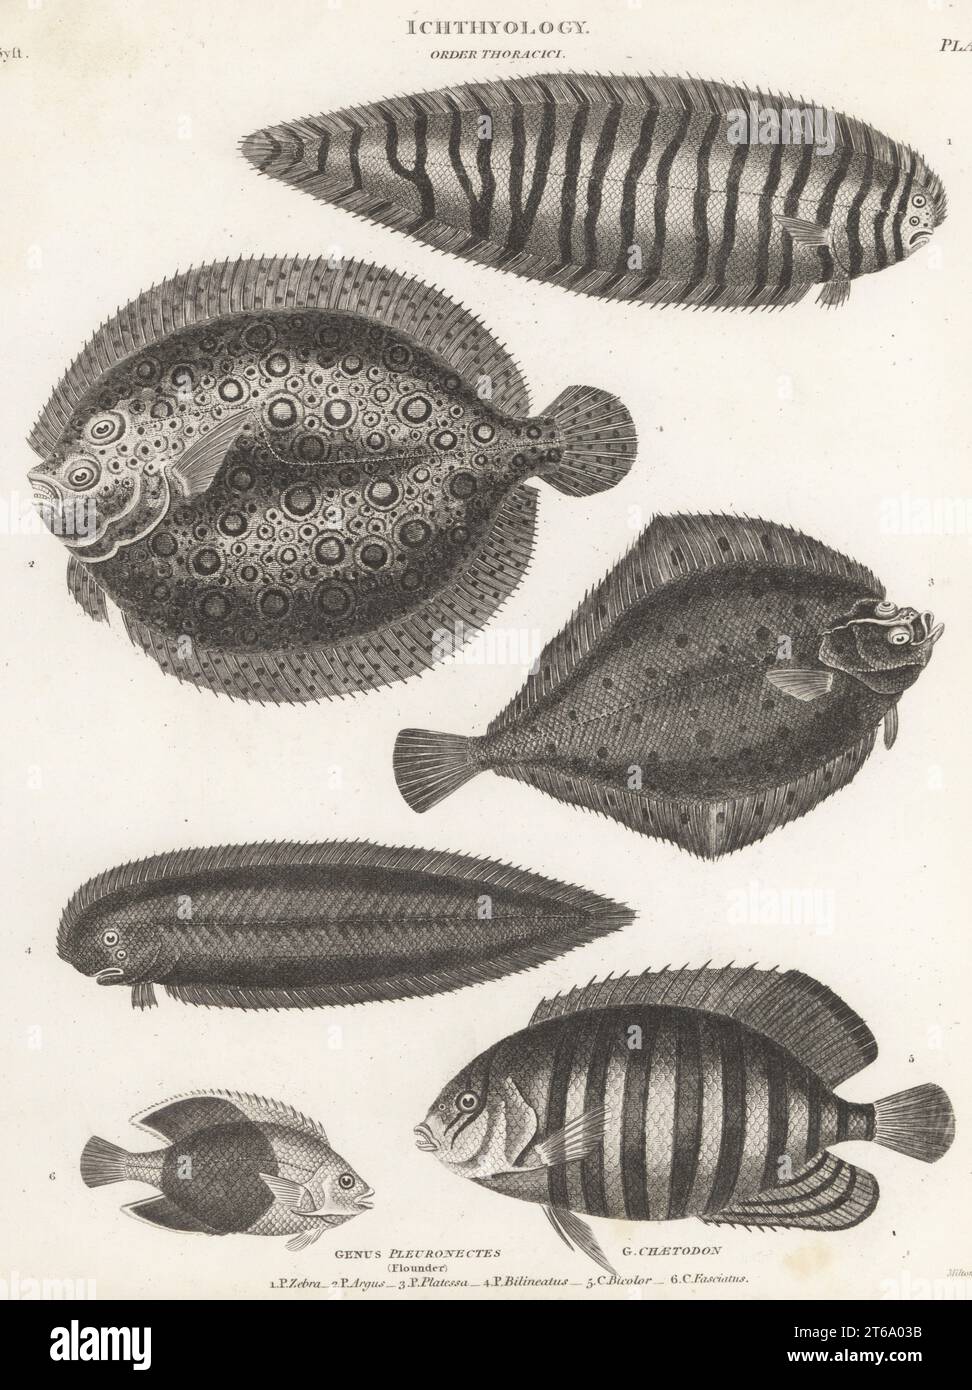 Sole, Zebrias zebra 1, plate fish, Bothus lunatus 2, European plaice, Pleuronectes platessa 3, tongue fish, Paraplagusia bilineata 4, bicolor angelfish, Centropyge bicolor 5, and diagonal butterflyfish, Chaetodon fasciatus 6. Copperplate engraving by Thomas Milton from Abraham Rees' Cyclopedia or Universal Dictionary of Arts, Sciences and Literature, Longman, Hurst, Rees, Orme and Brown, Paternoster Row, London, 1814. Stock Photo